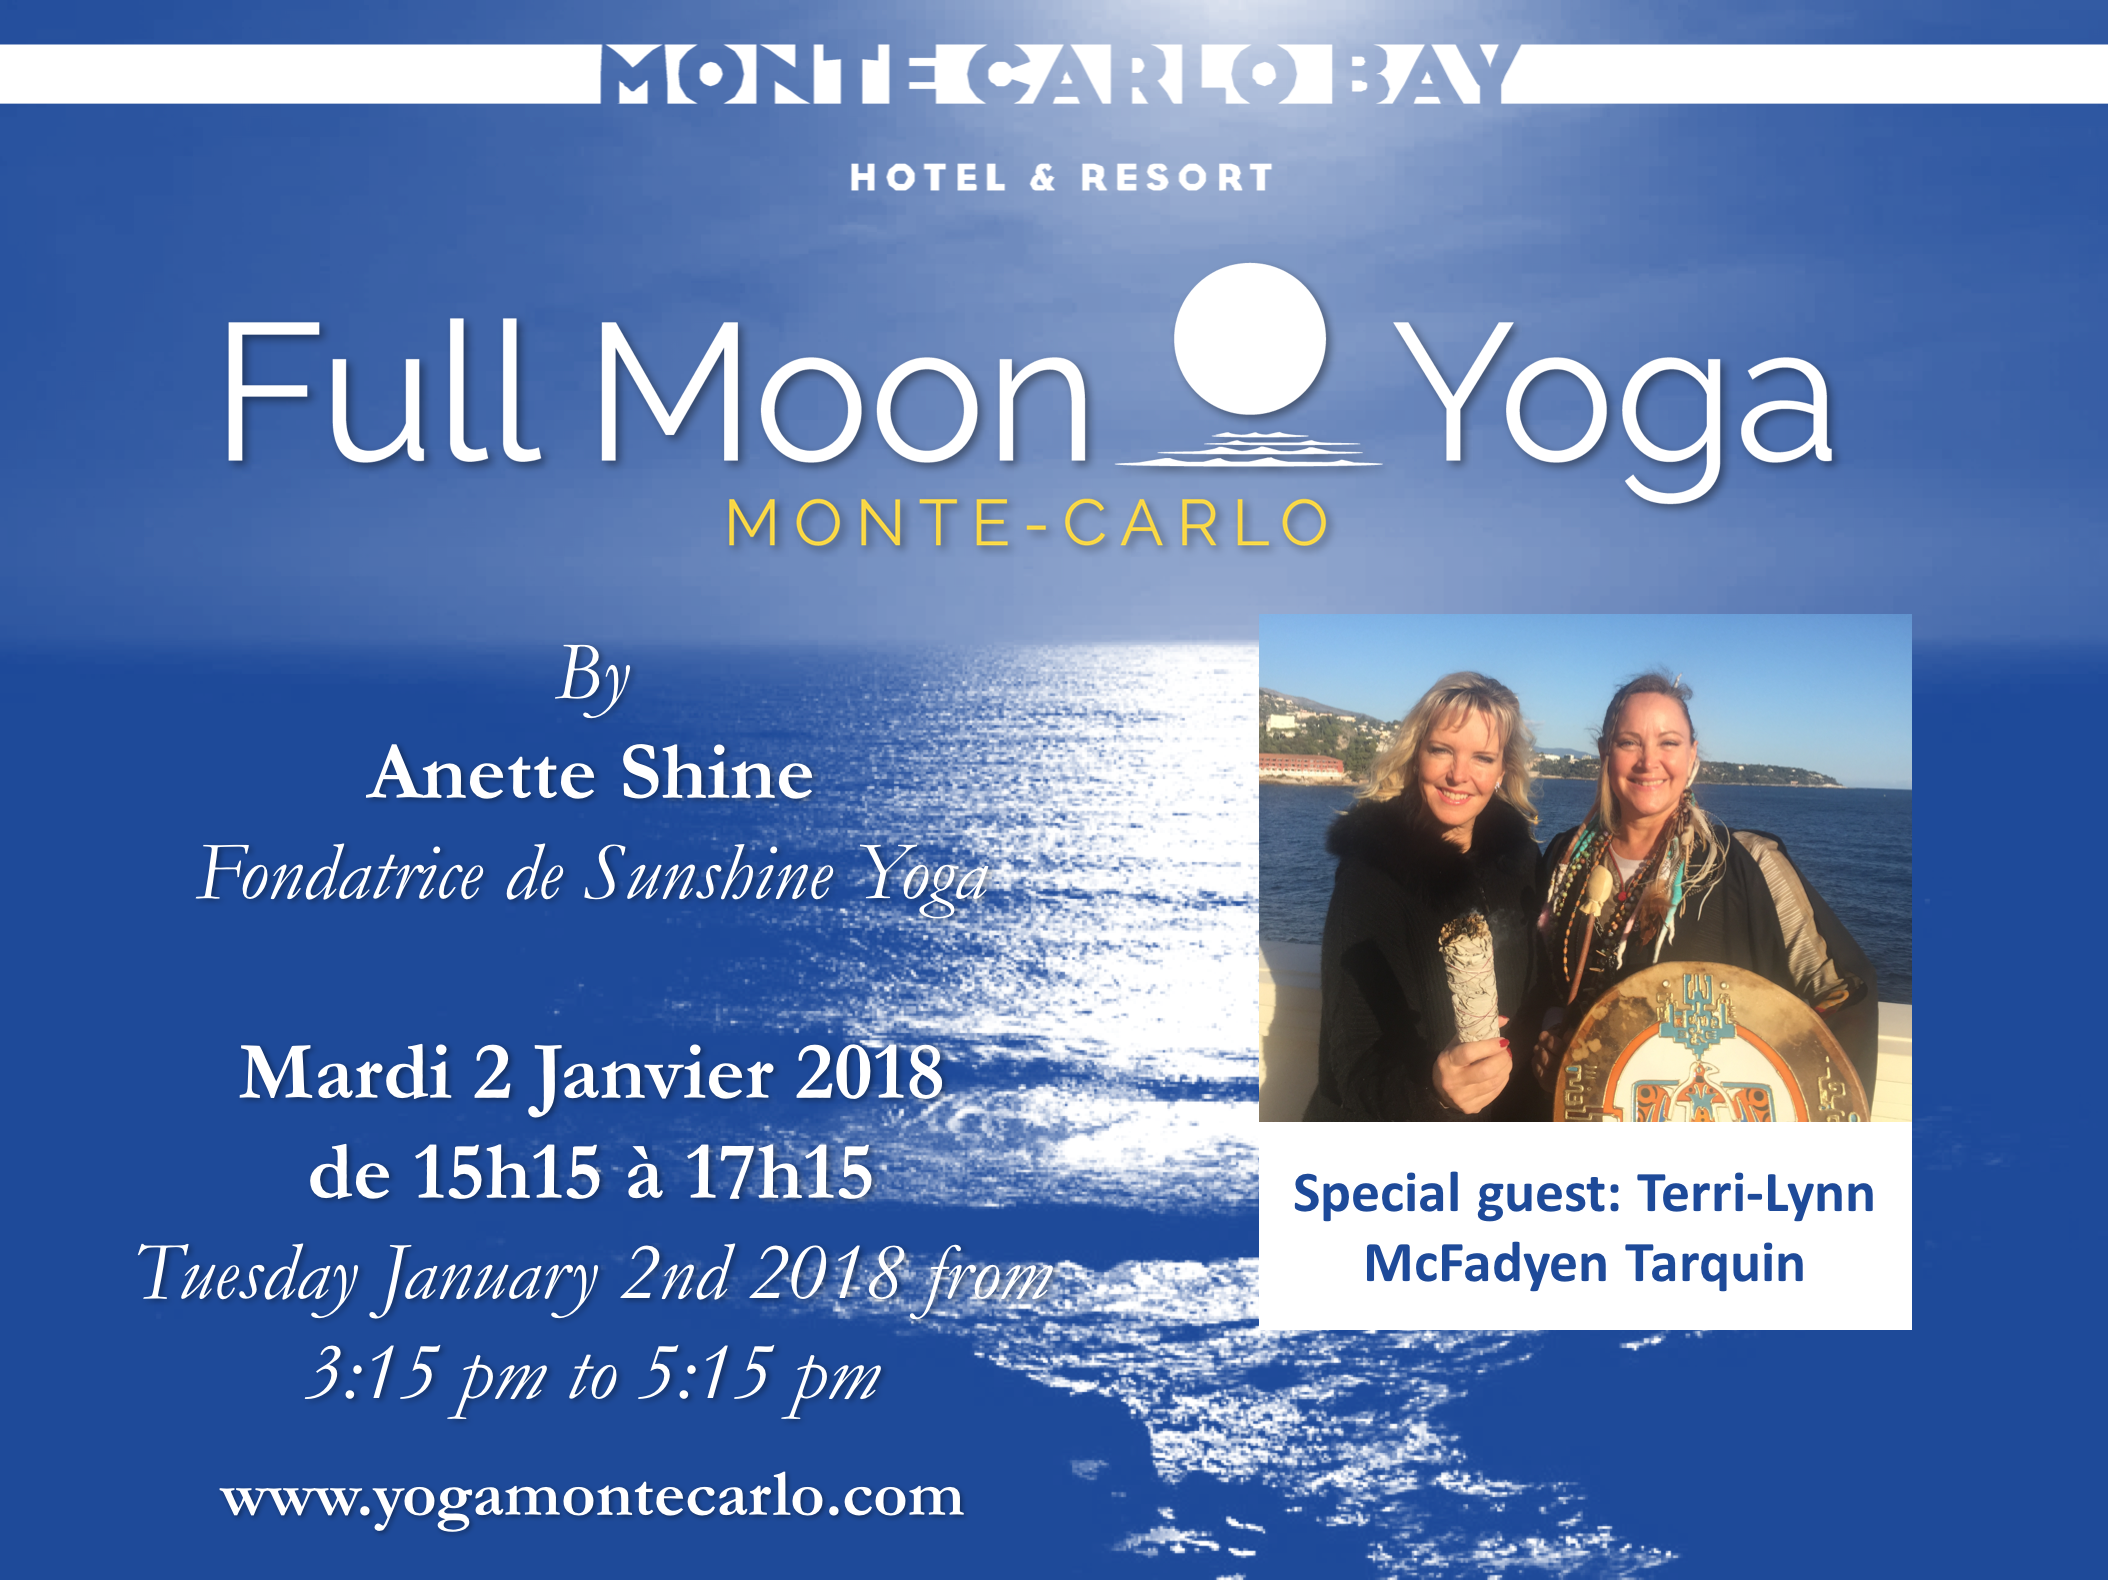 You are currently viewing Full Moon Yoga Monte-Carlo on Jan 2nd 2018, OUTSIDE at 3:15 pm